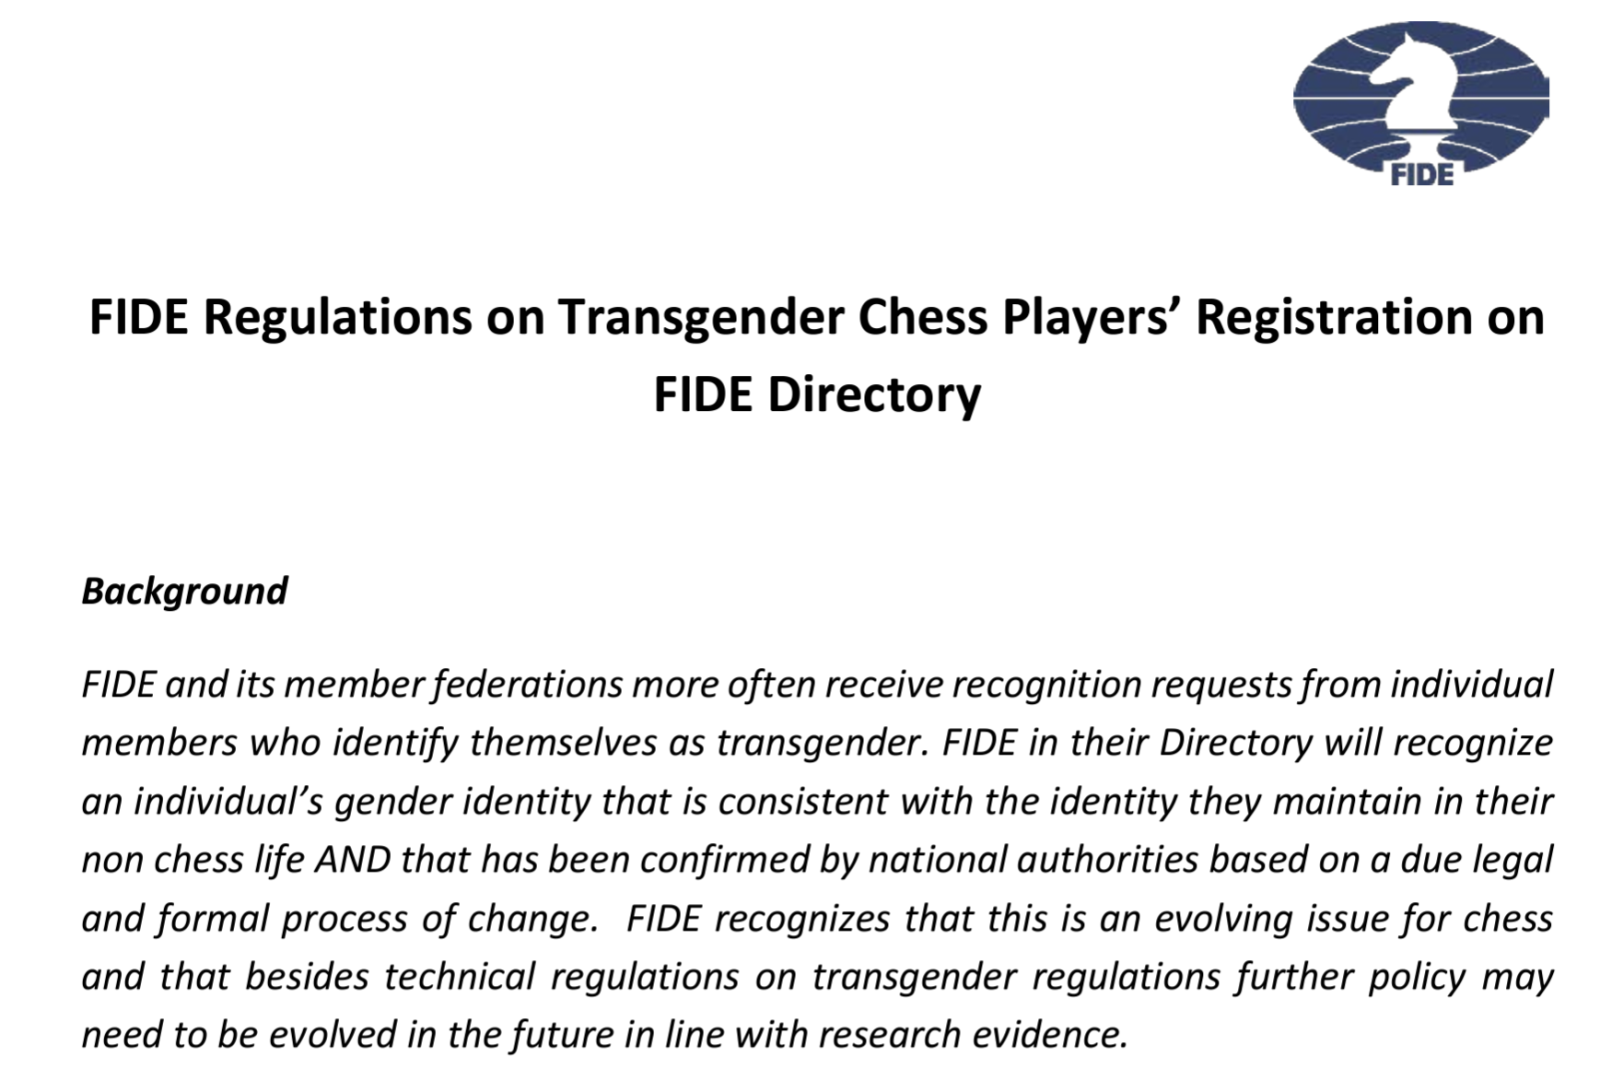 FIDE bans transgender women from competing in women's chess events pending  'further analysis